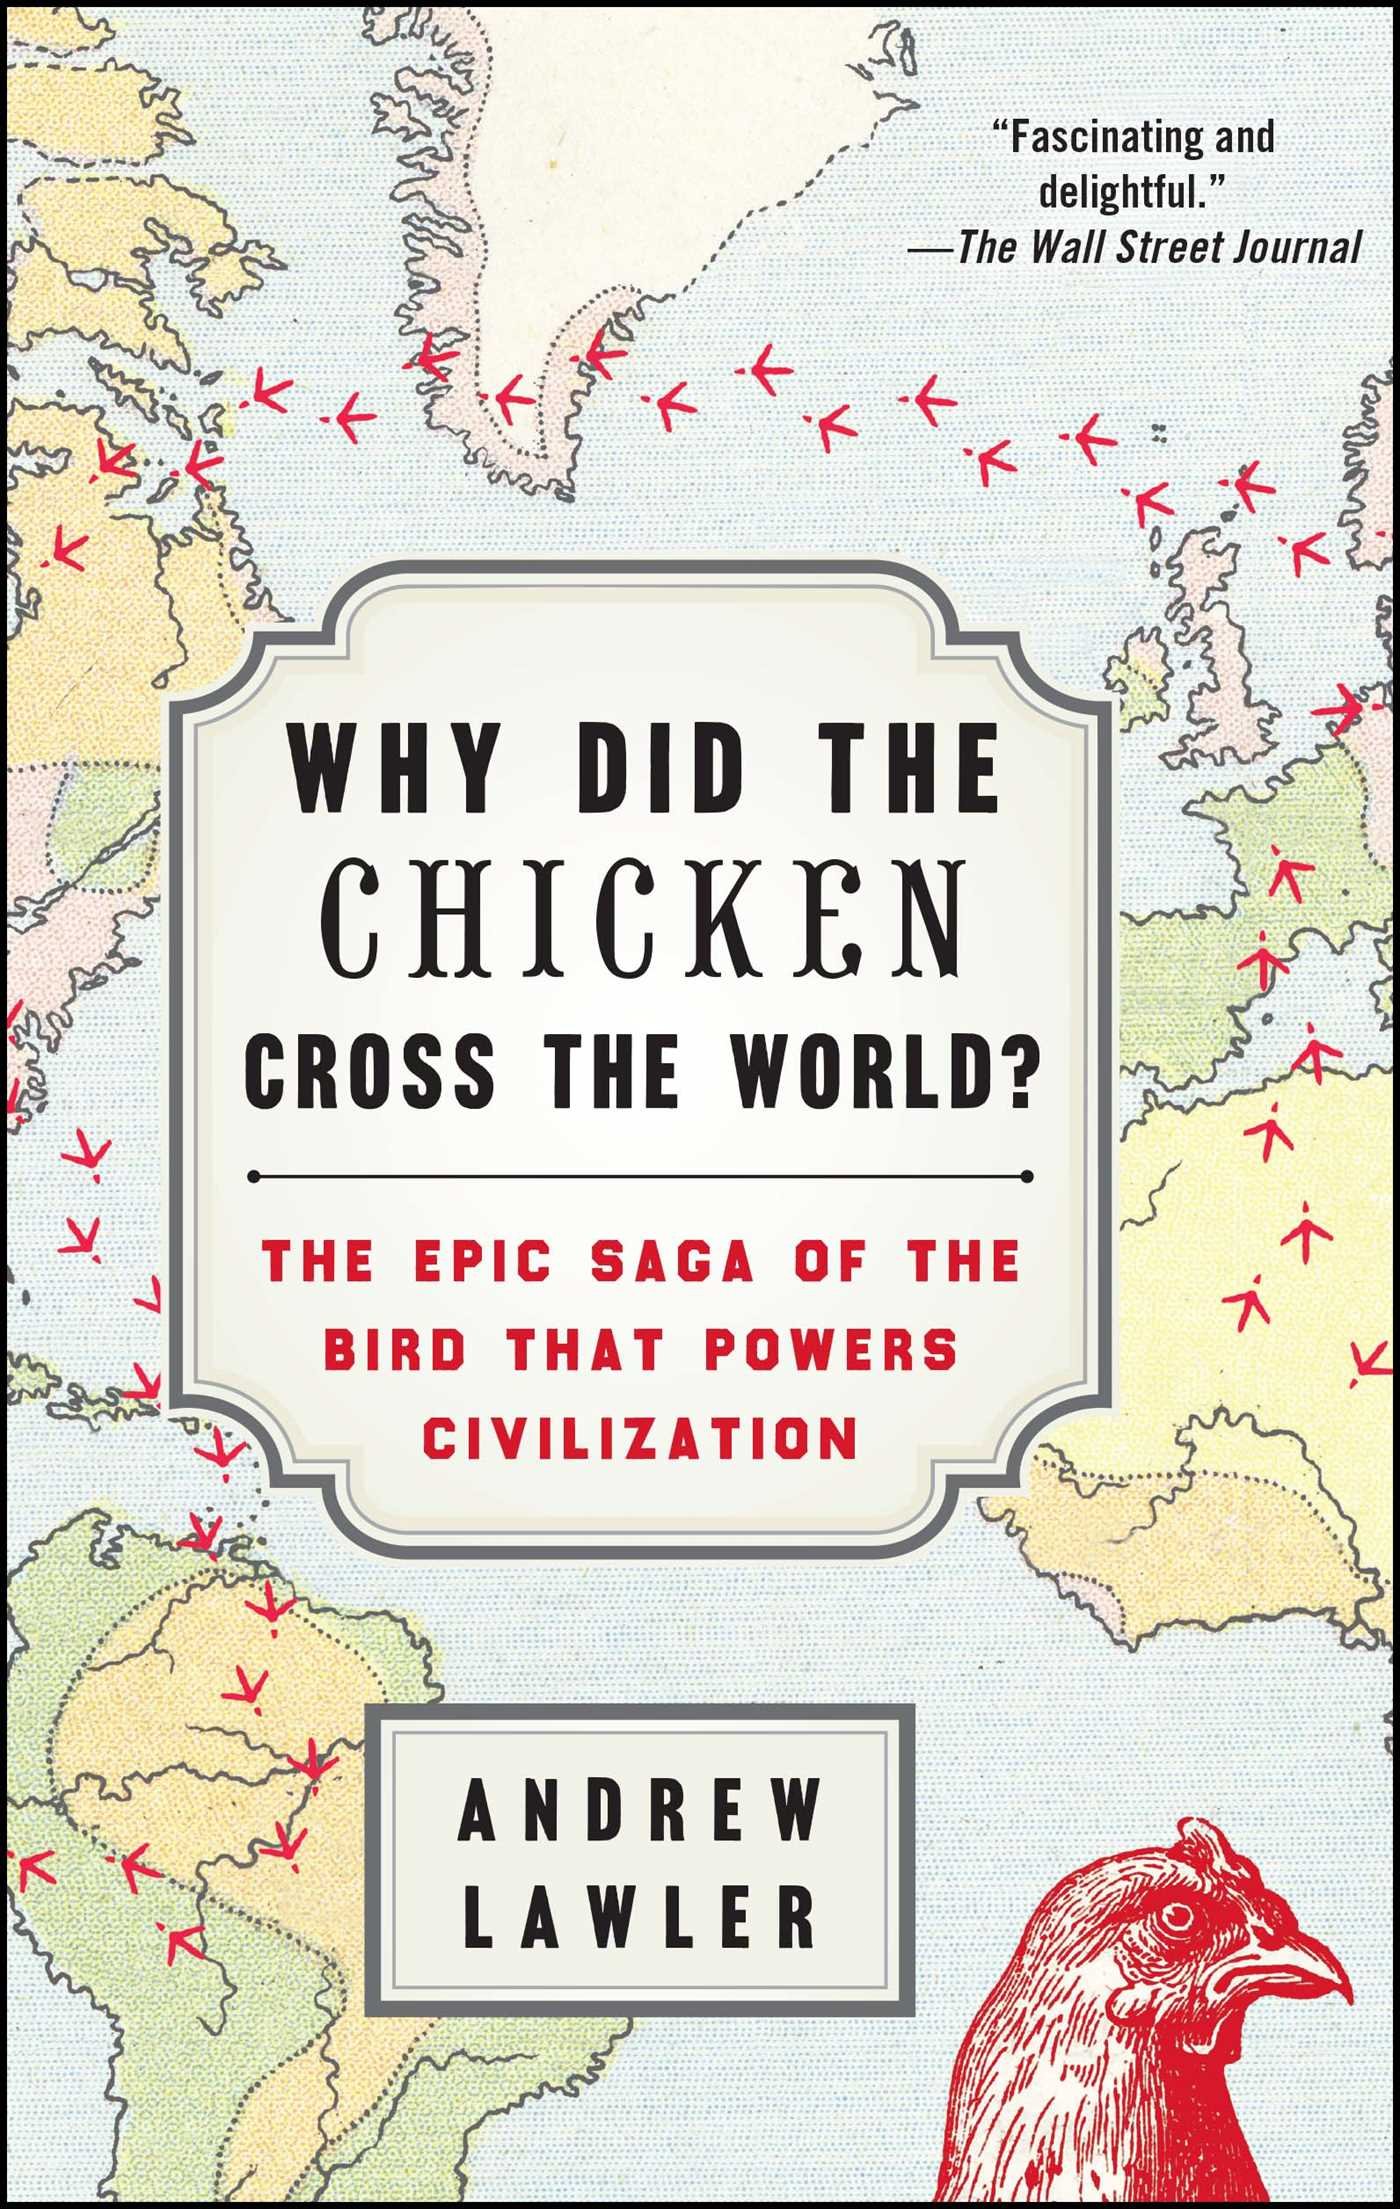 Why Did the Chicken Cross the World? The Epic Saga of the Bird that Powers Civilization